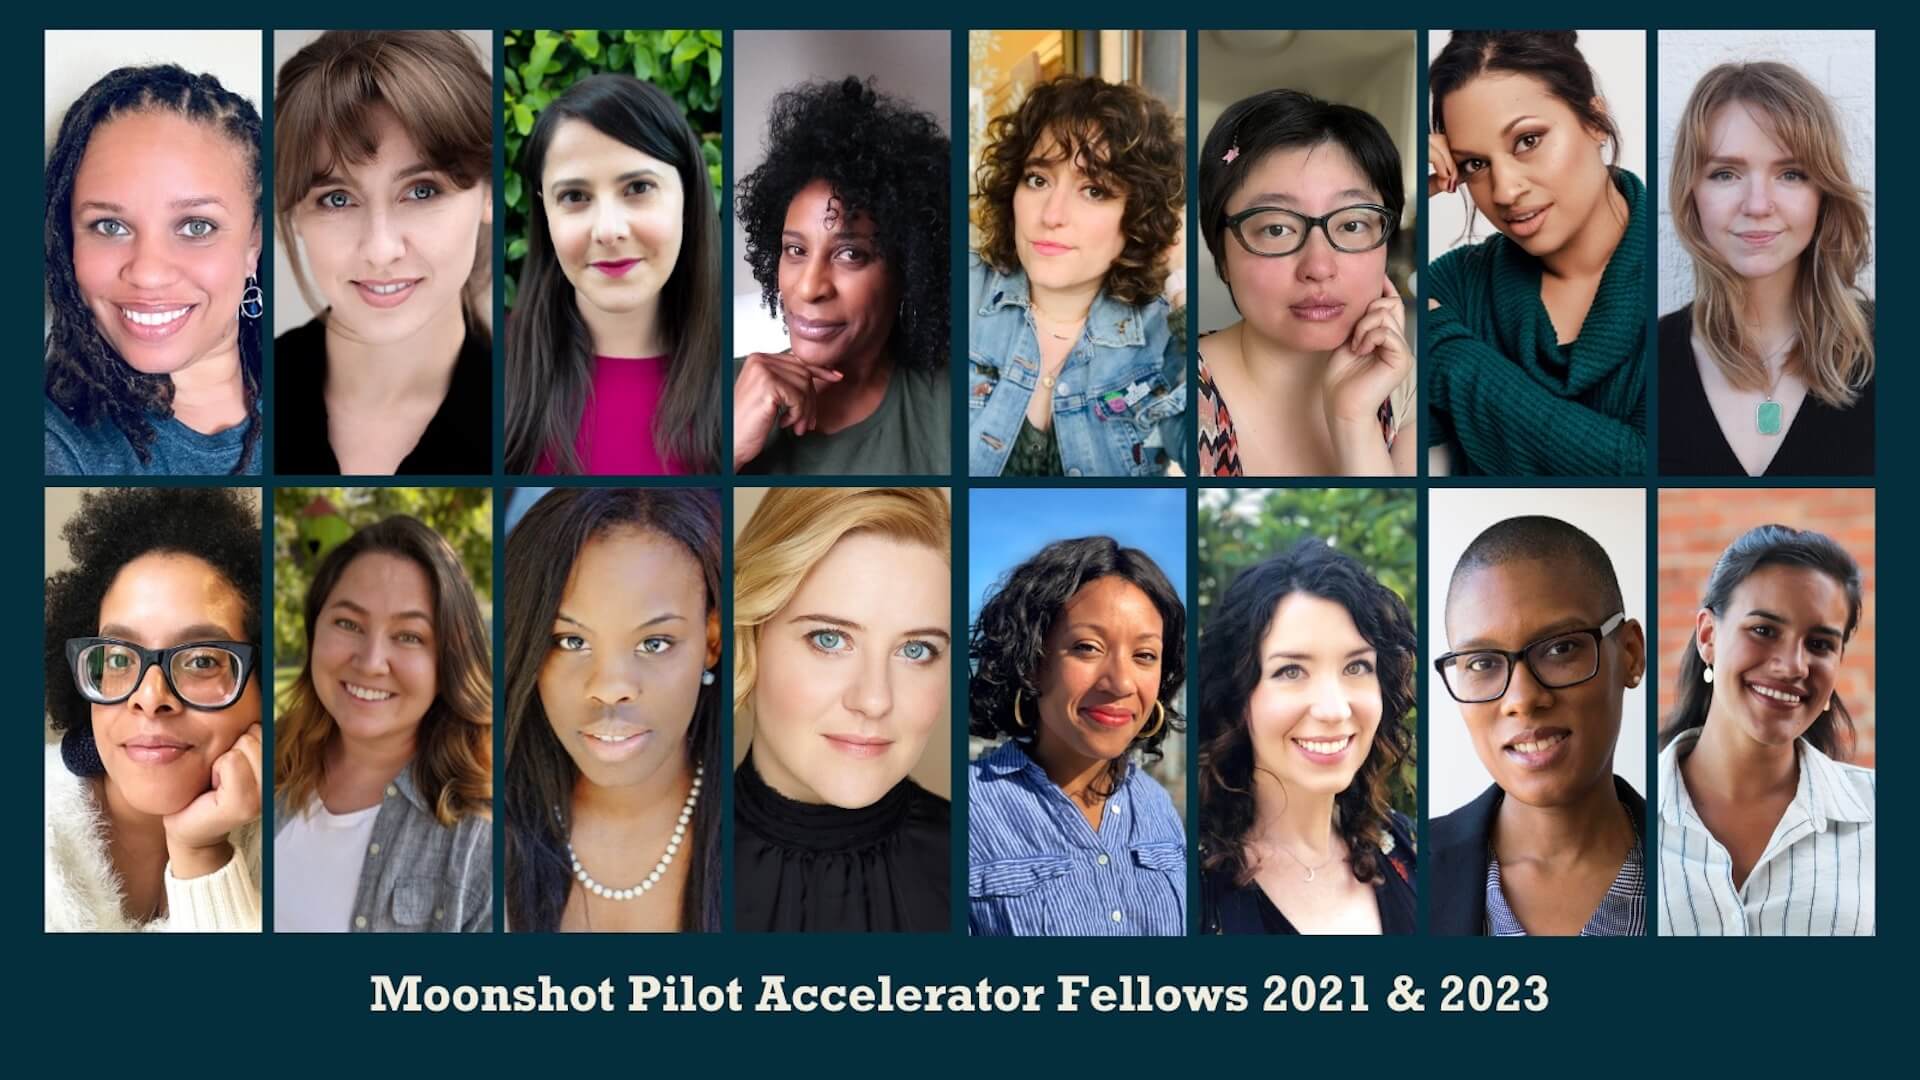 Moonshot Initiative Wants To Help You Pitch Your Pilot in Hollywood